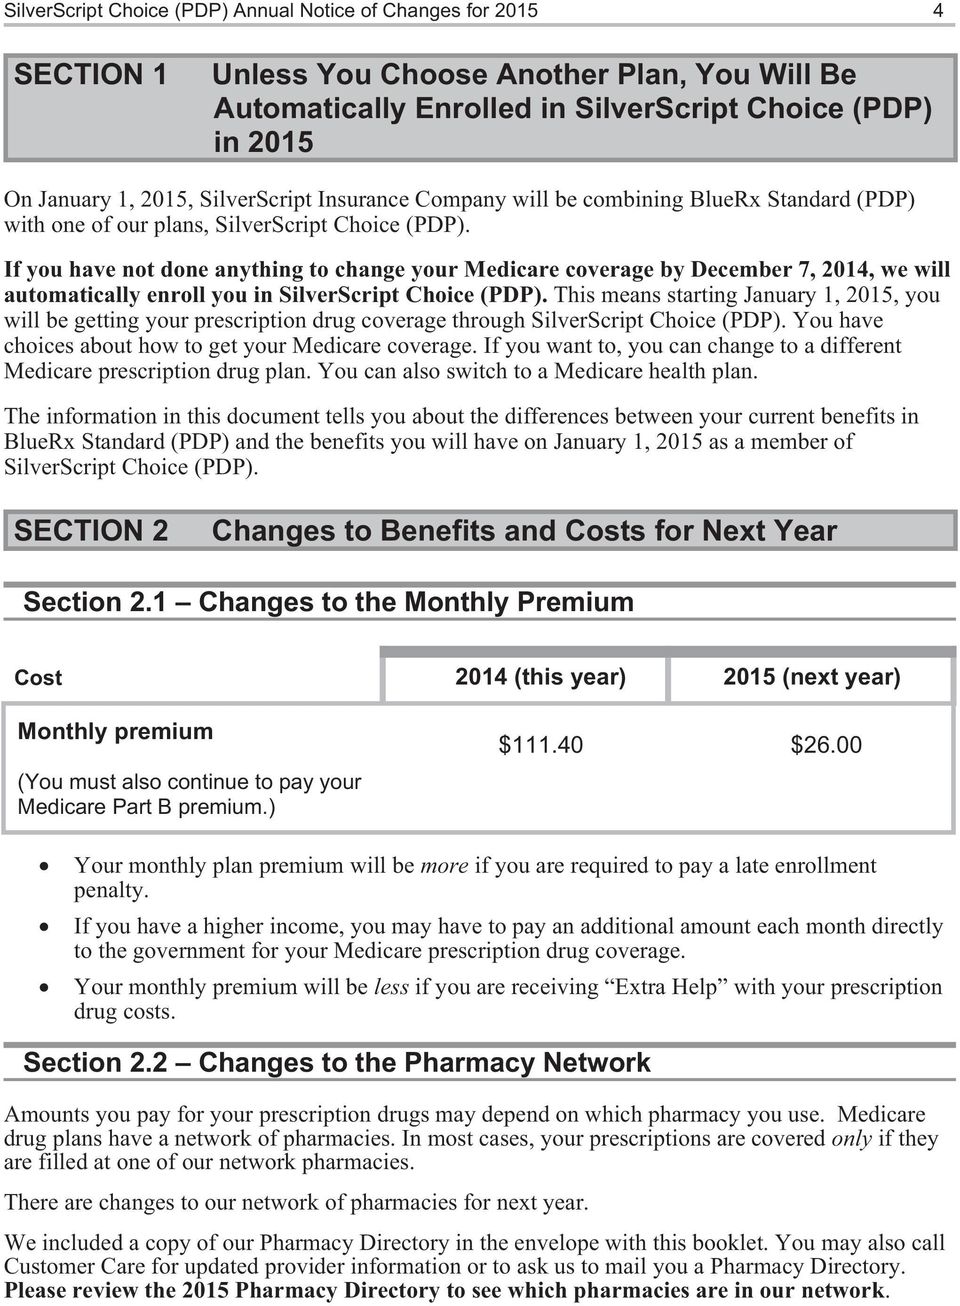 If you have not done anything to change your Medicare coverage by December 7, 2014, we will automatically enroll you in SilverScript Choice (PDP).